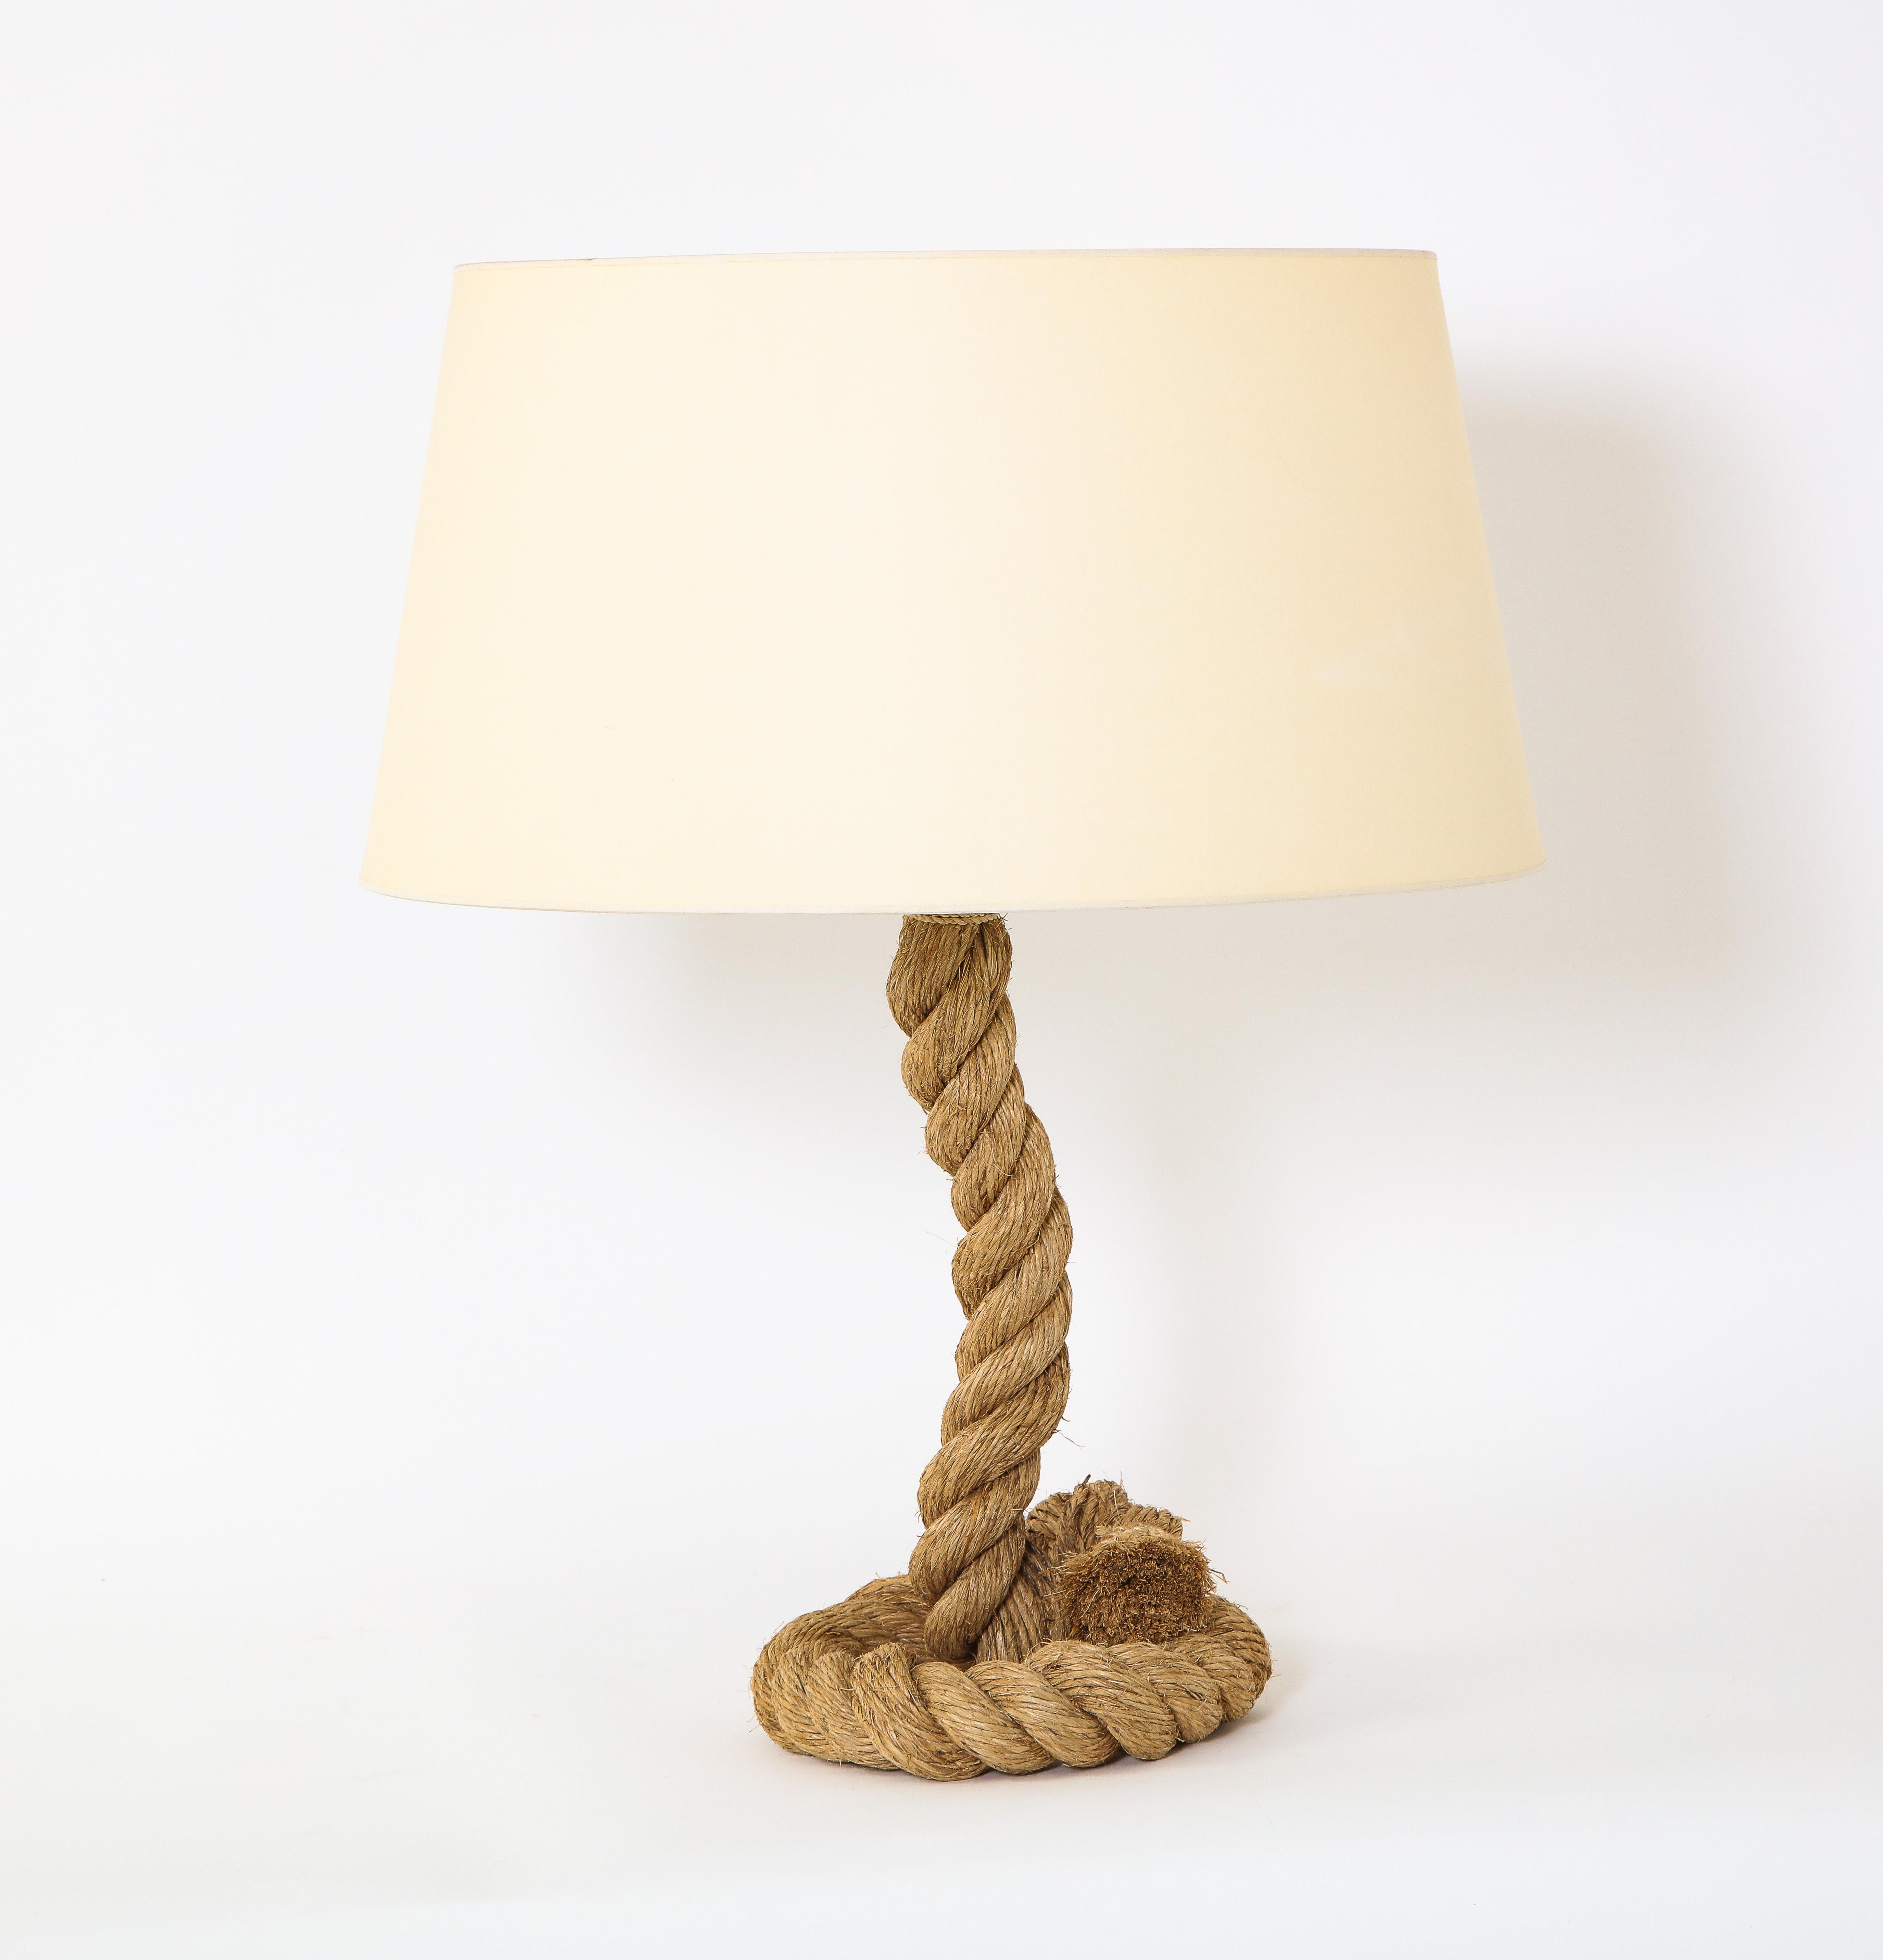 Thick rope lamp attributed to Audoux Minet.